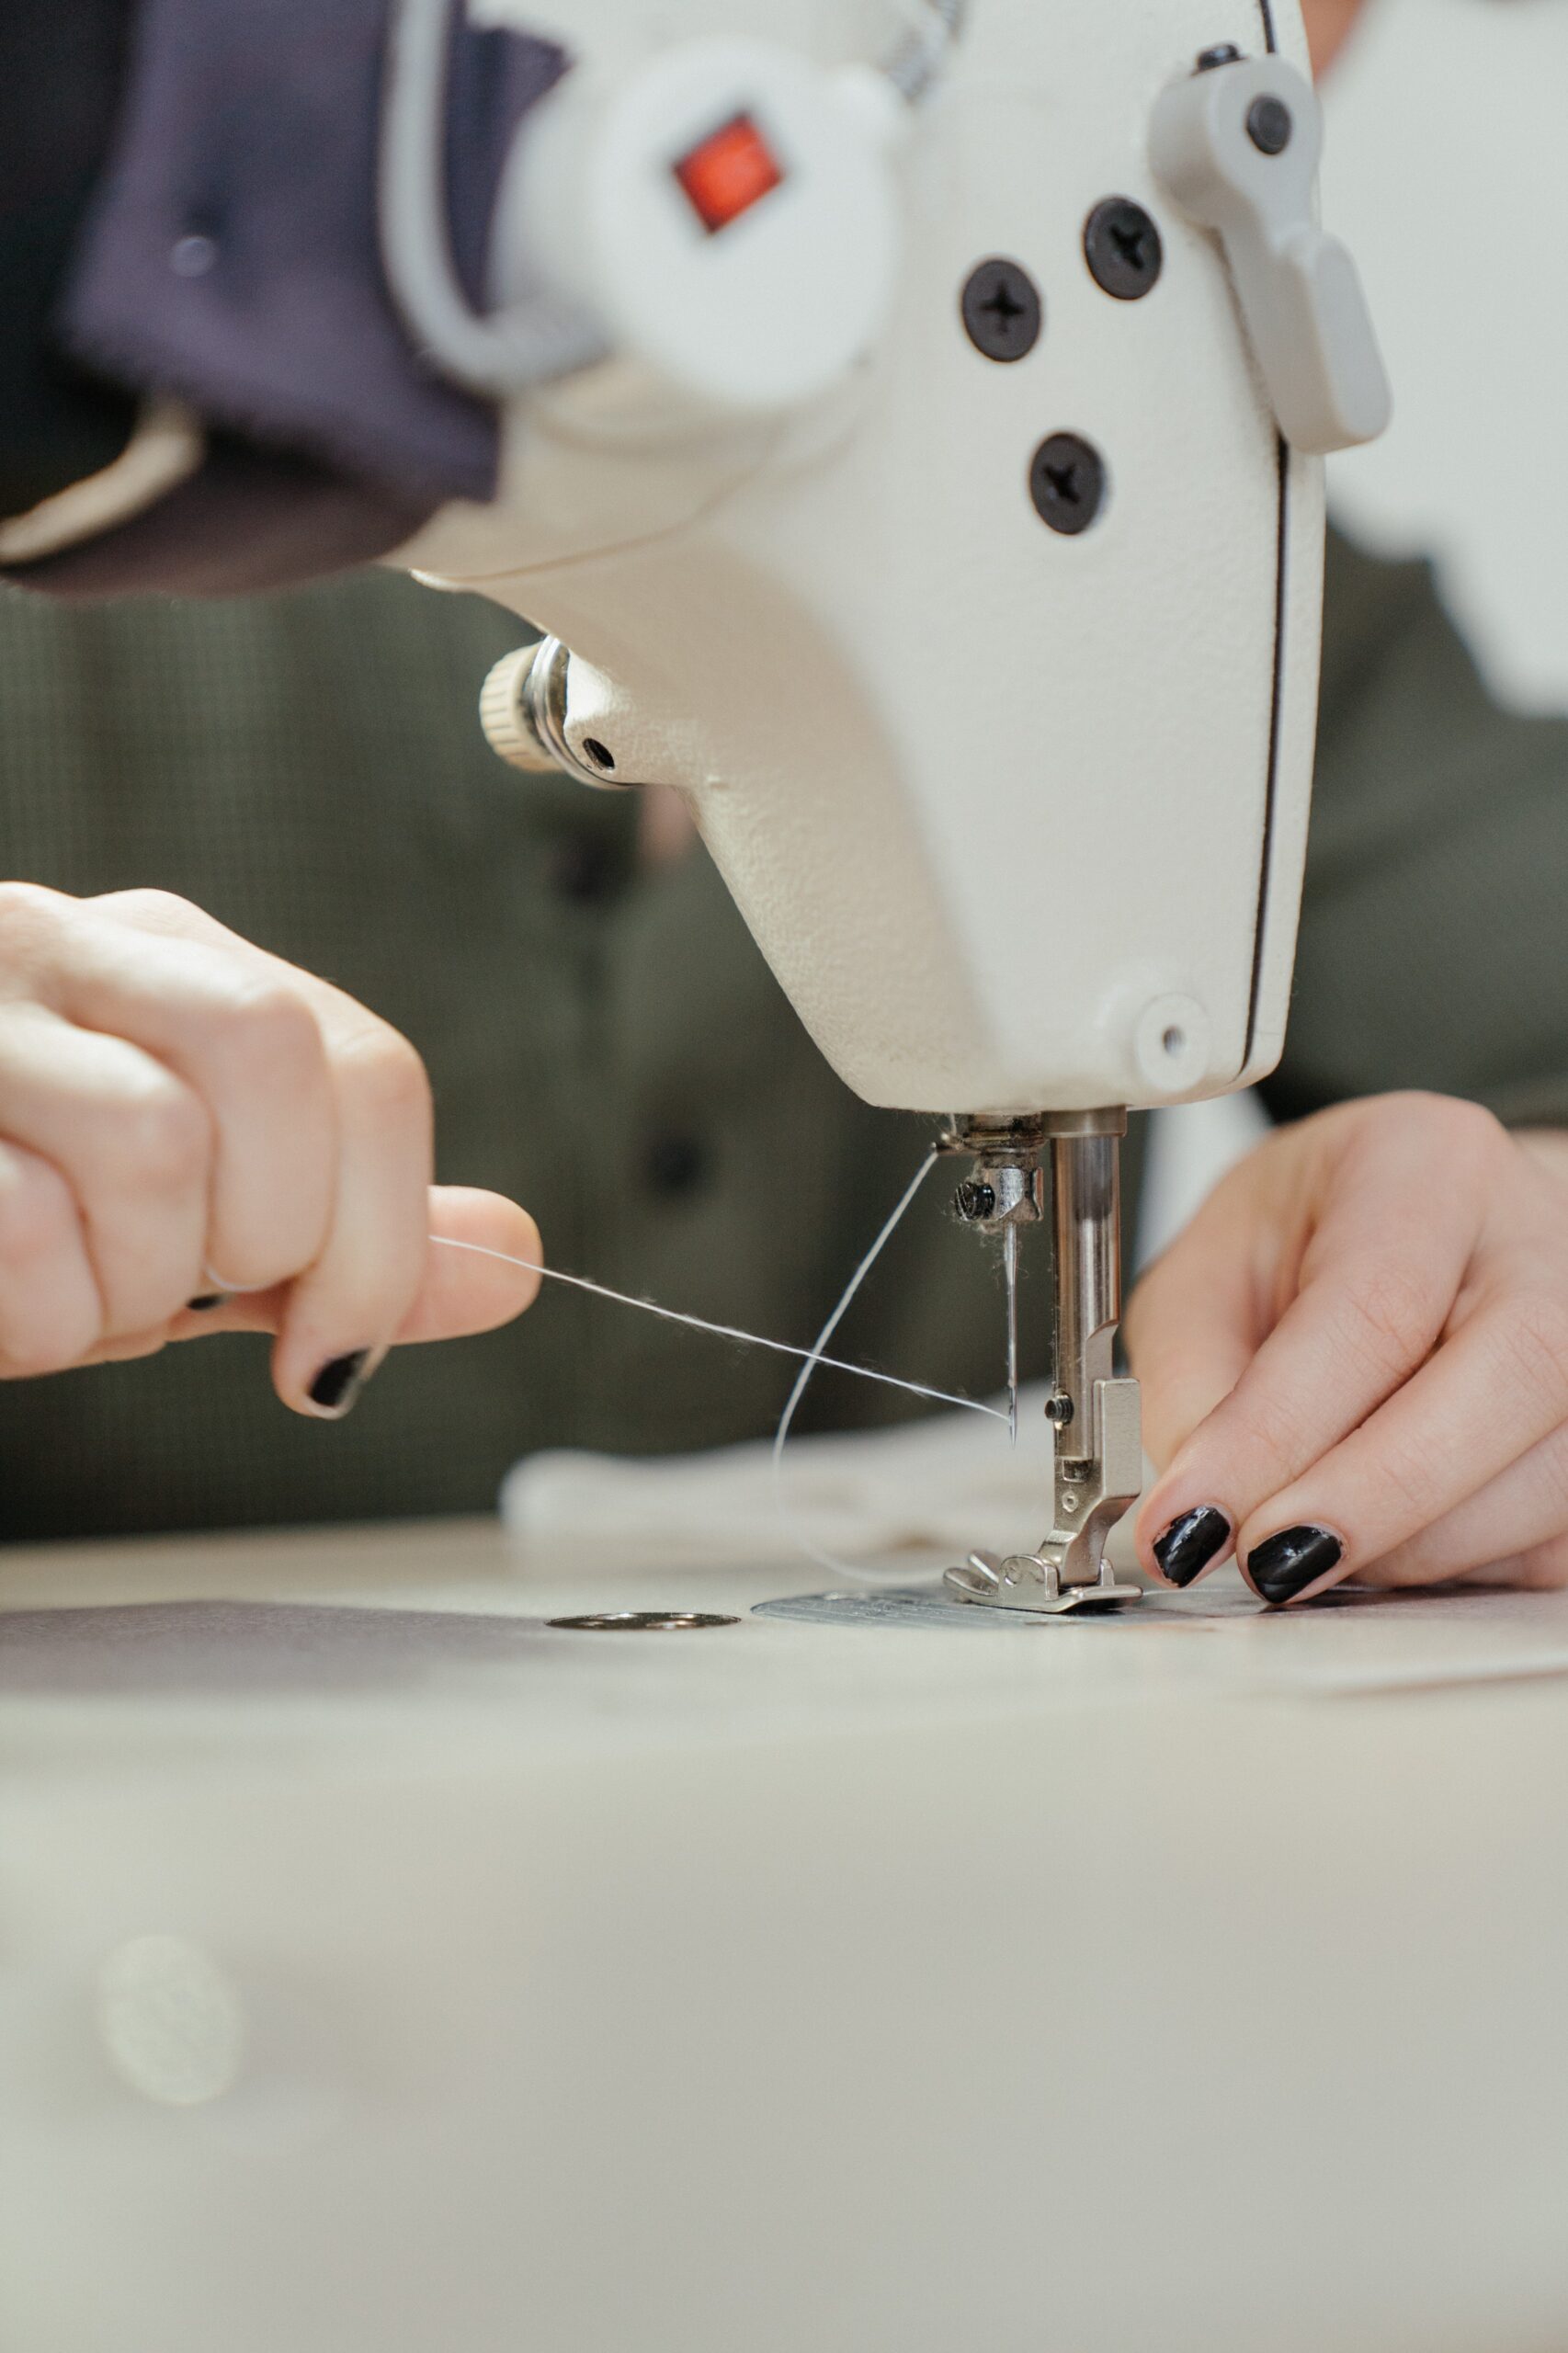 Person sewing a white sewing machine